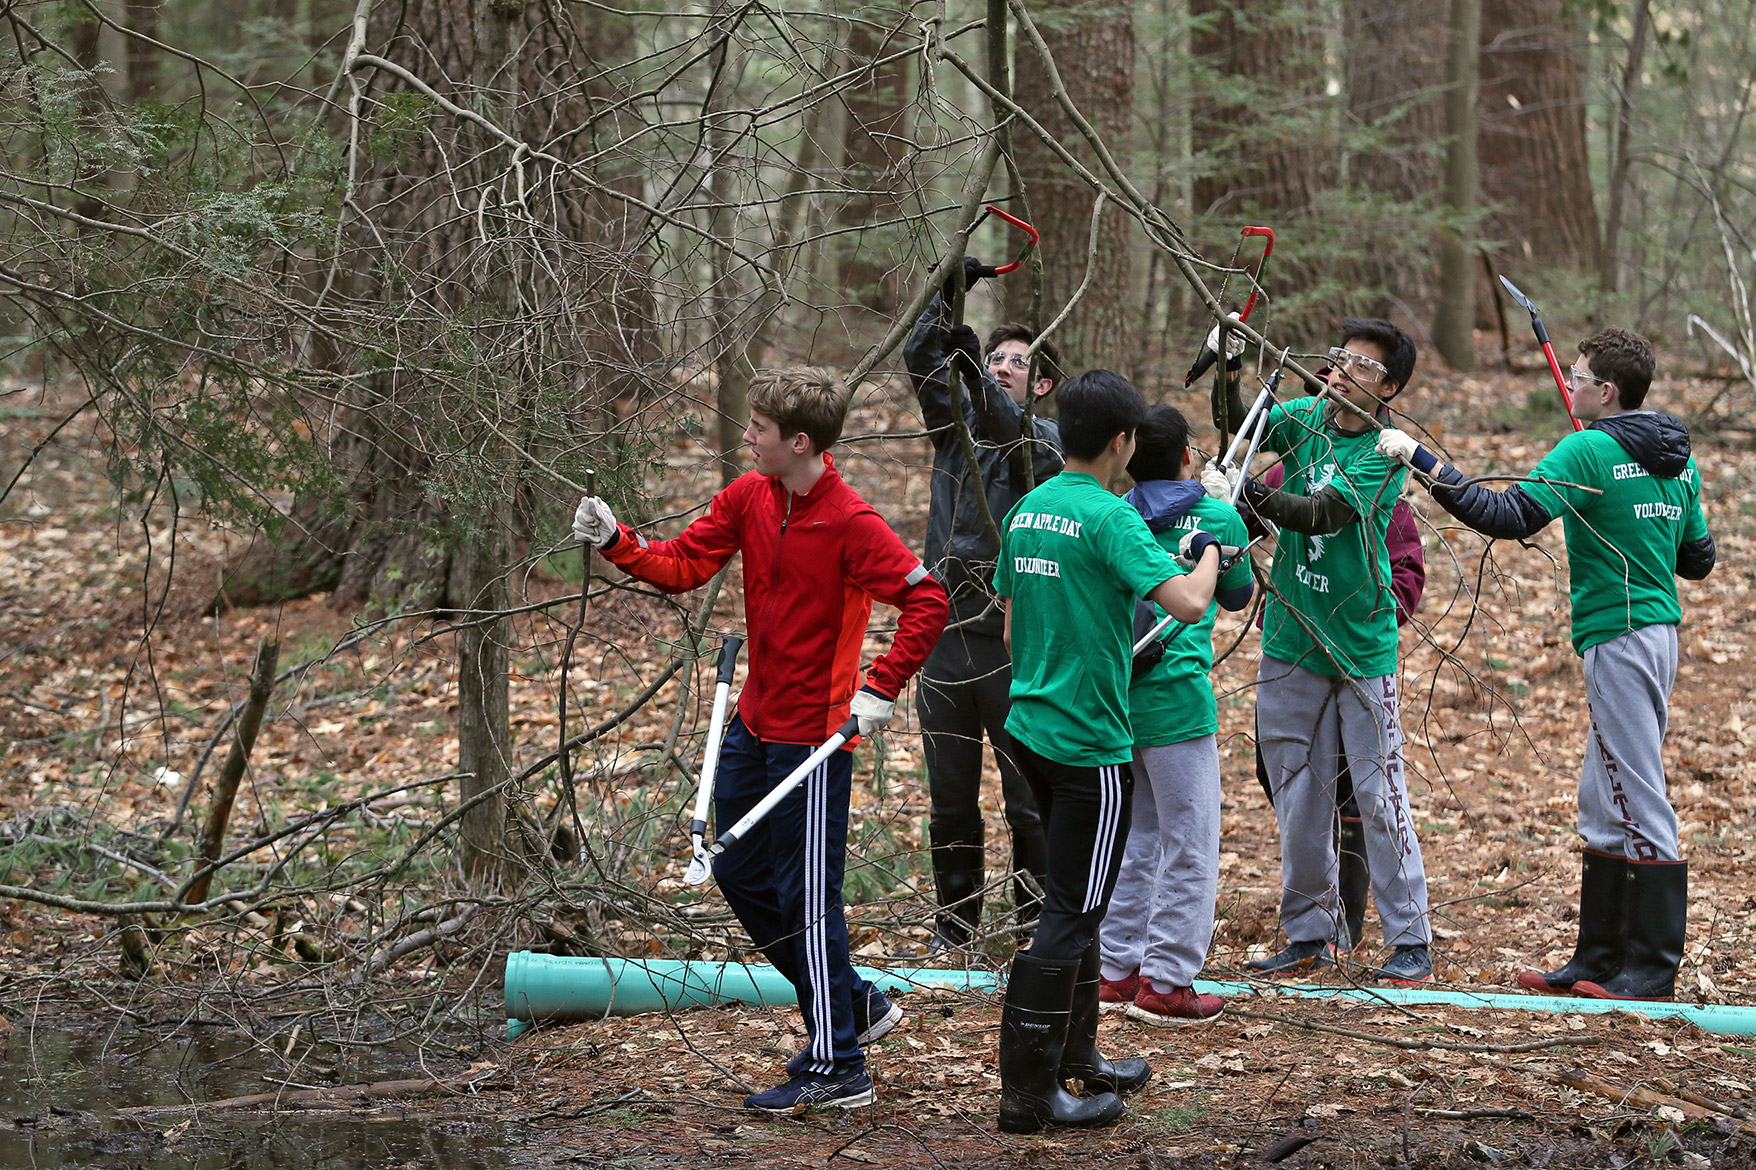 Exeter students cut dead branches off trees in the woodlands.